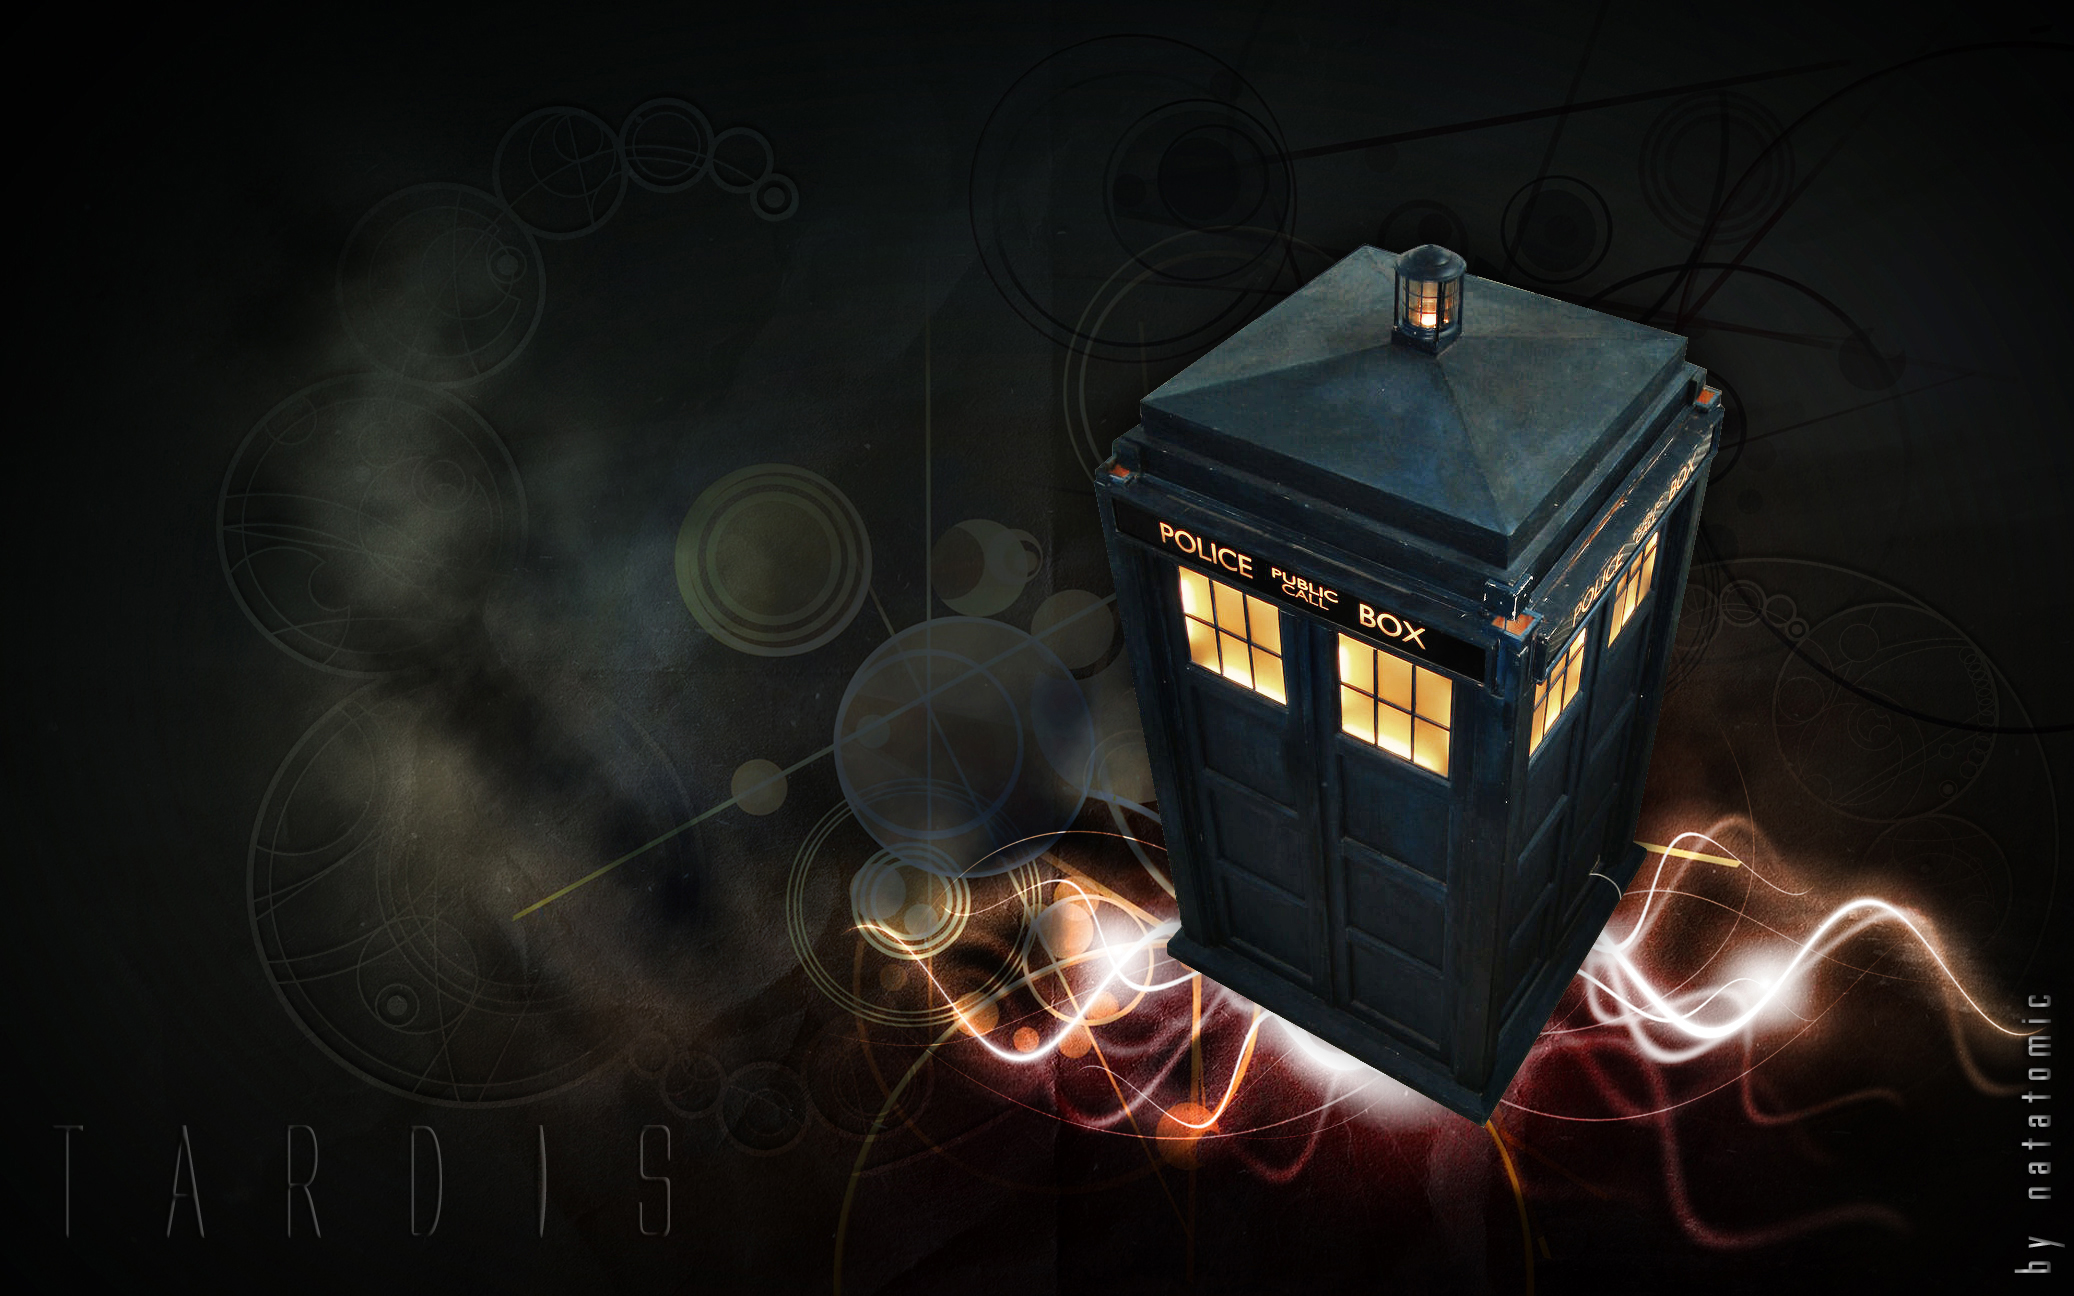 doctor who tardis wallpaper wallpapers55com   Best Wallpapers for 2074x1296